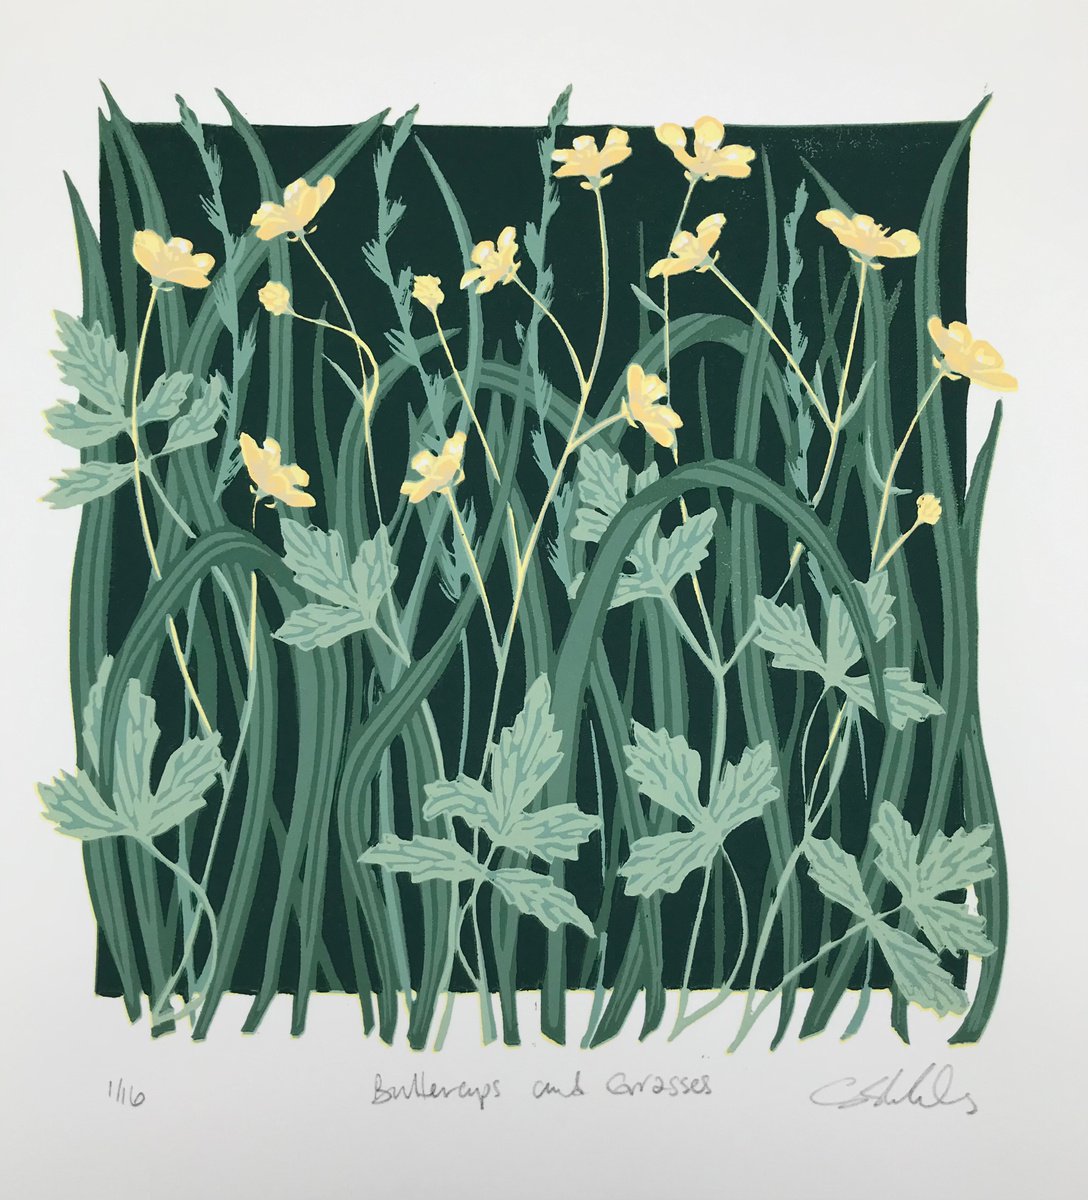 Buttercups and grasses by Gerry Coles